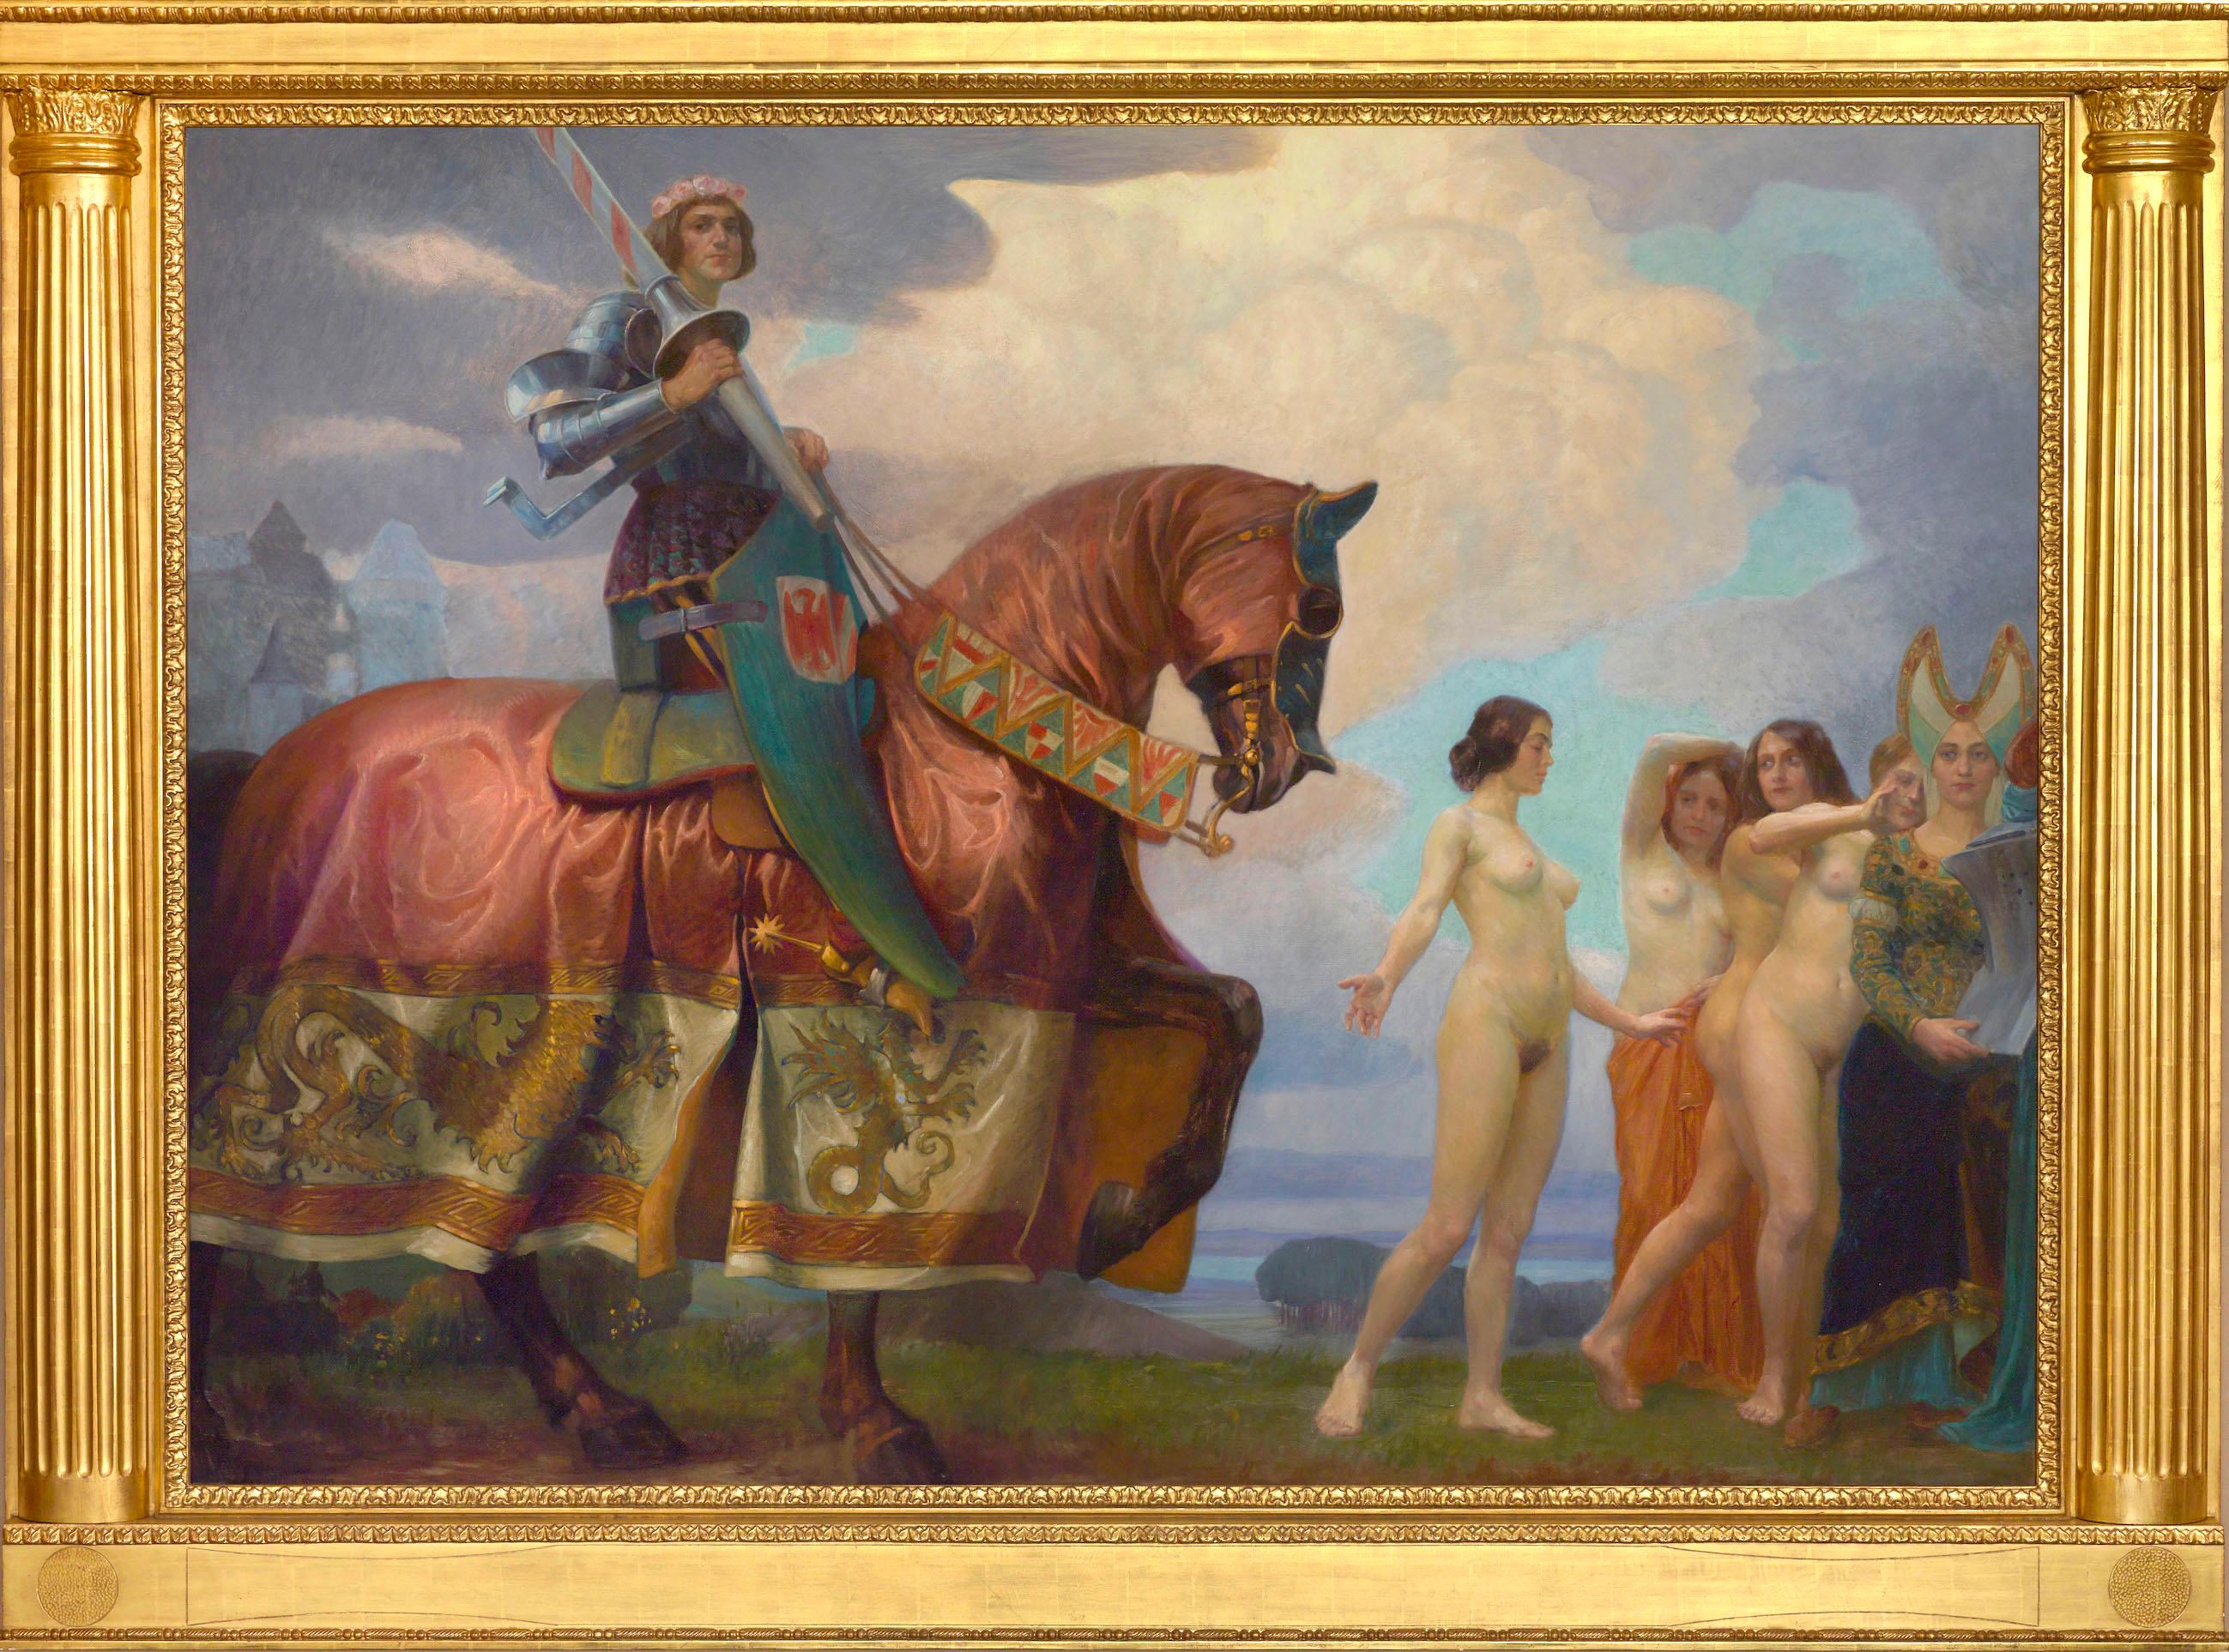 Friedrich König Figurative Painting - "From the Saga of the Nibelungs"